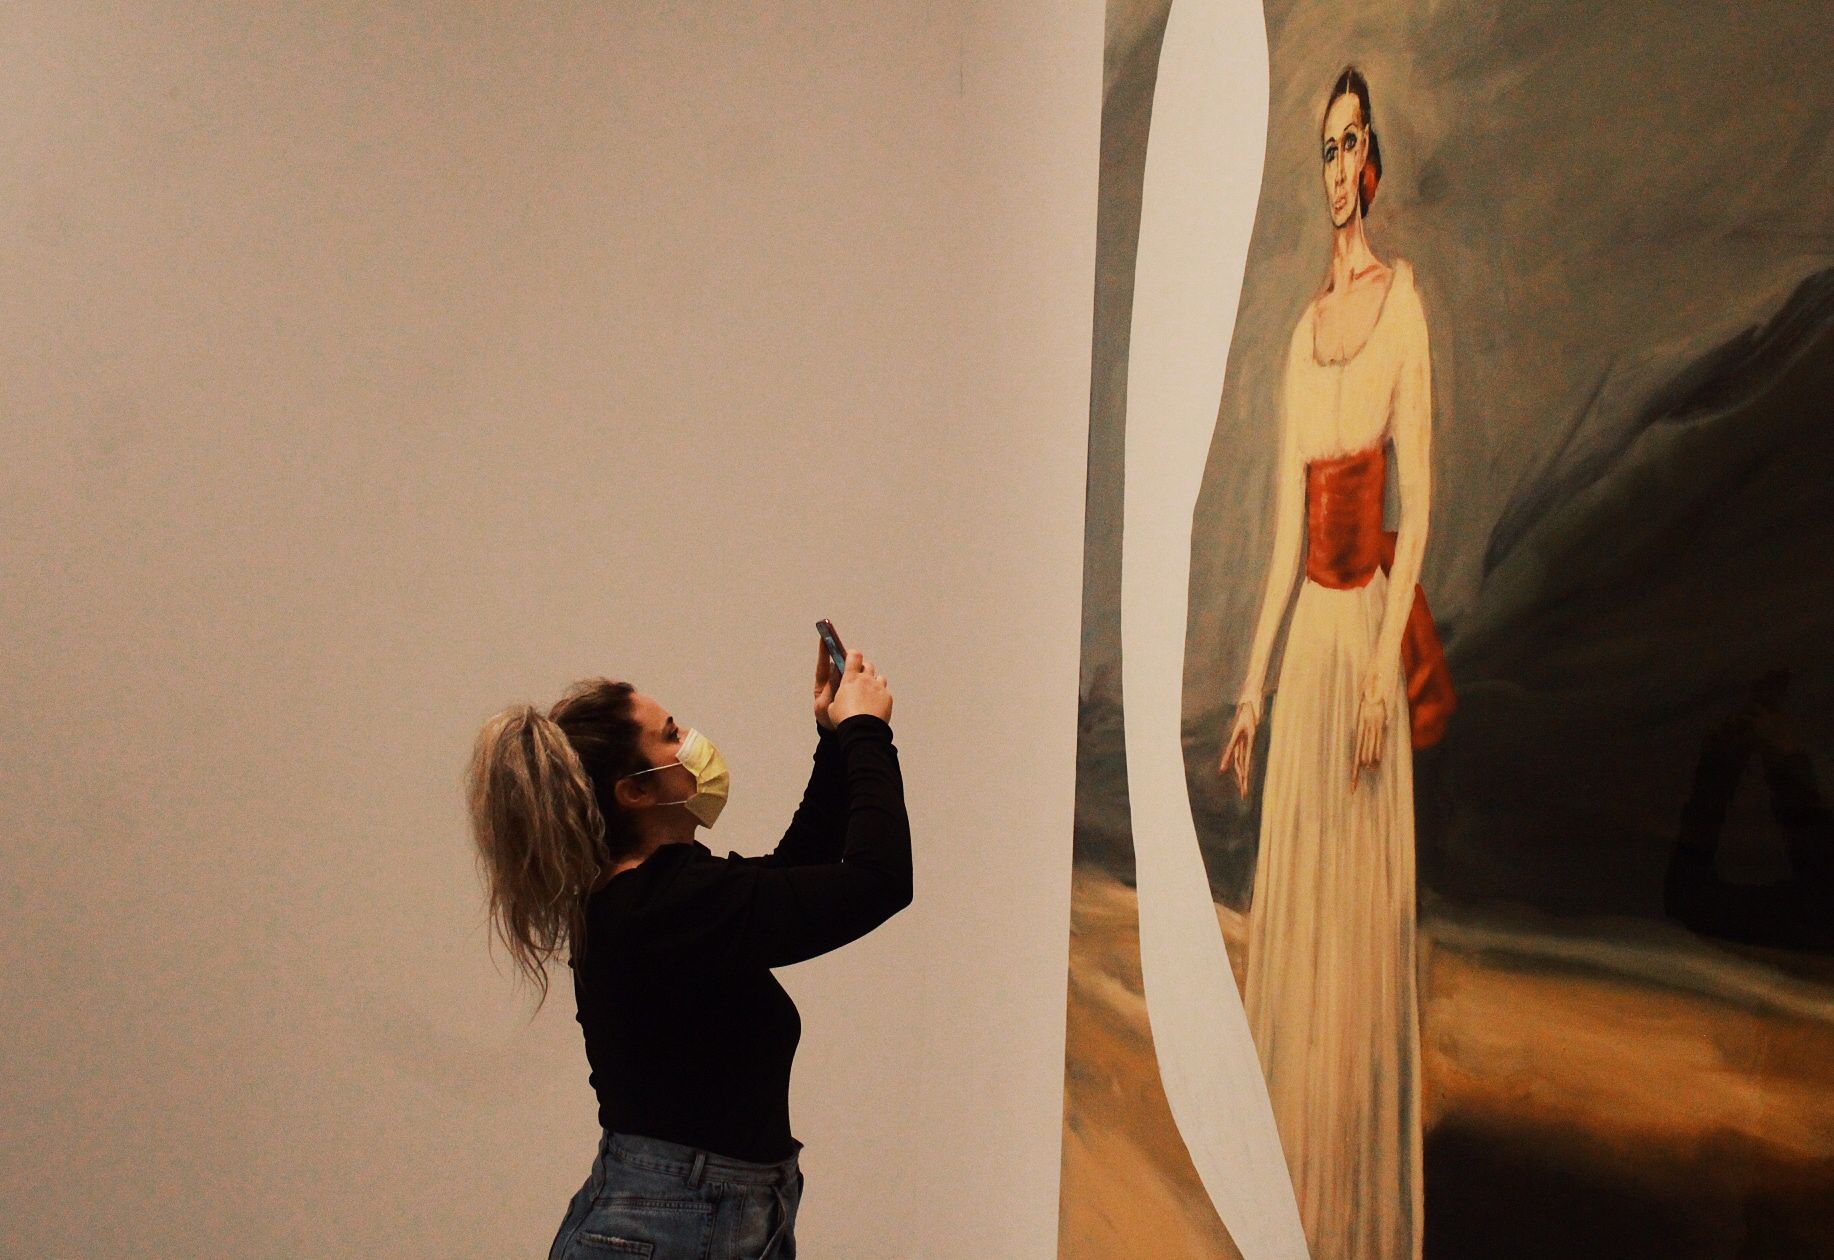 The North American artist recreates traditional Spanish paintings.